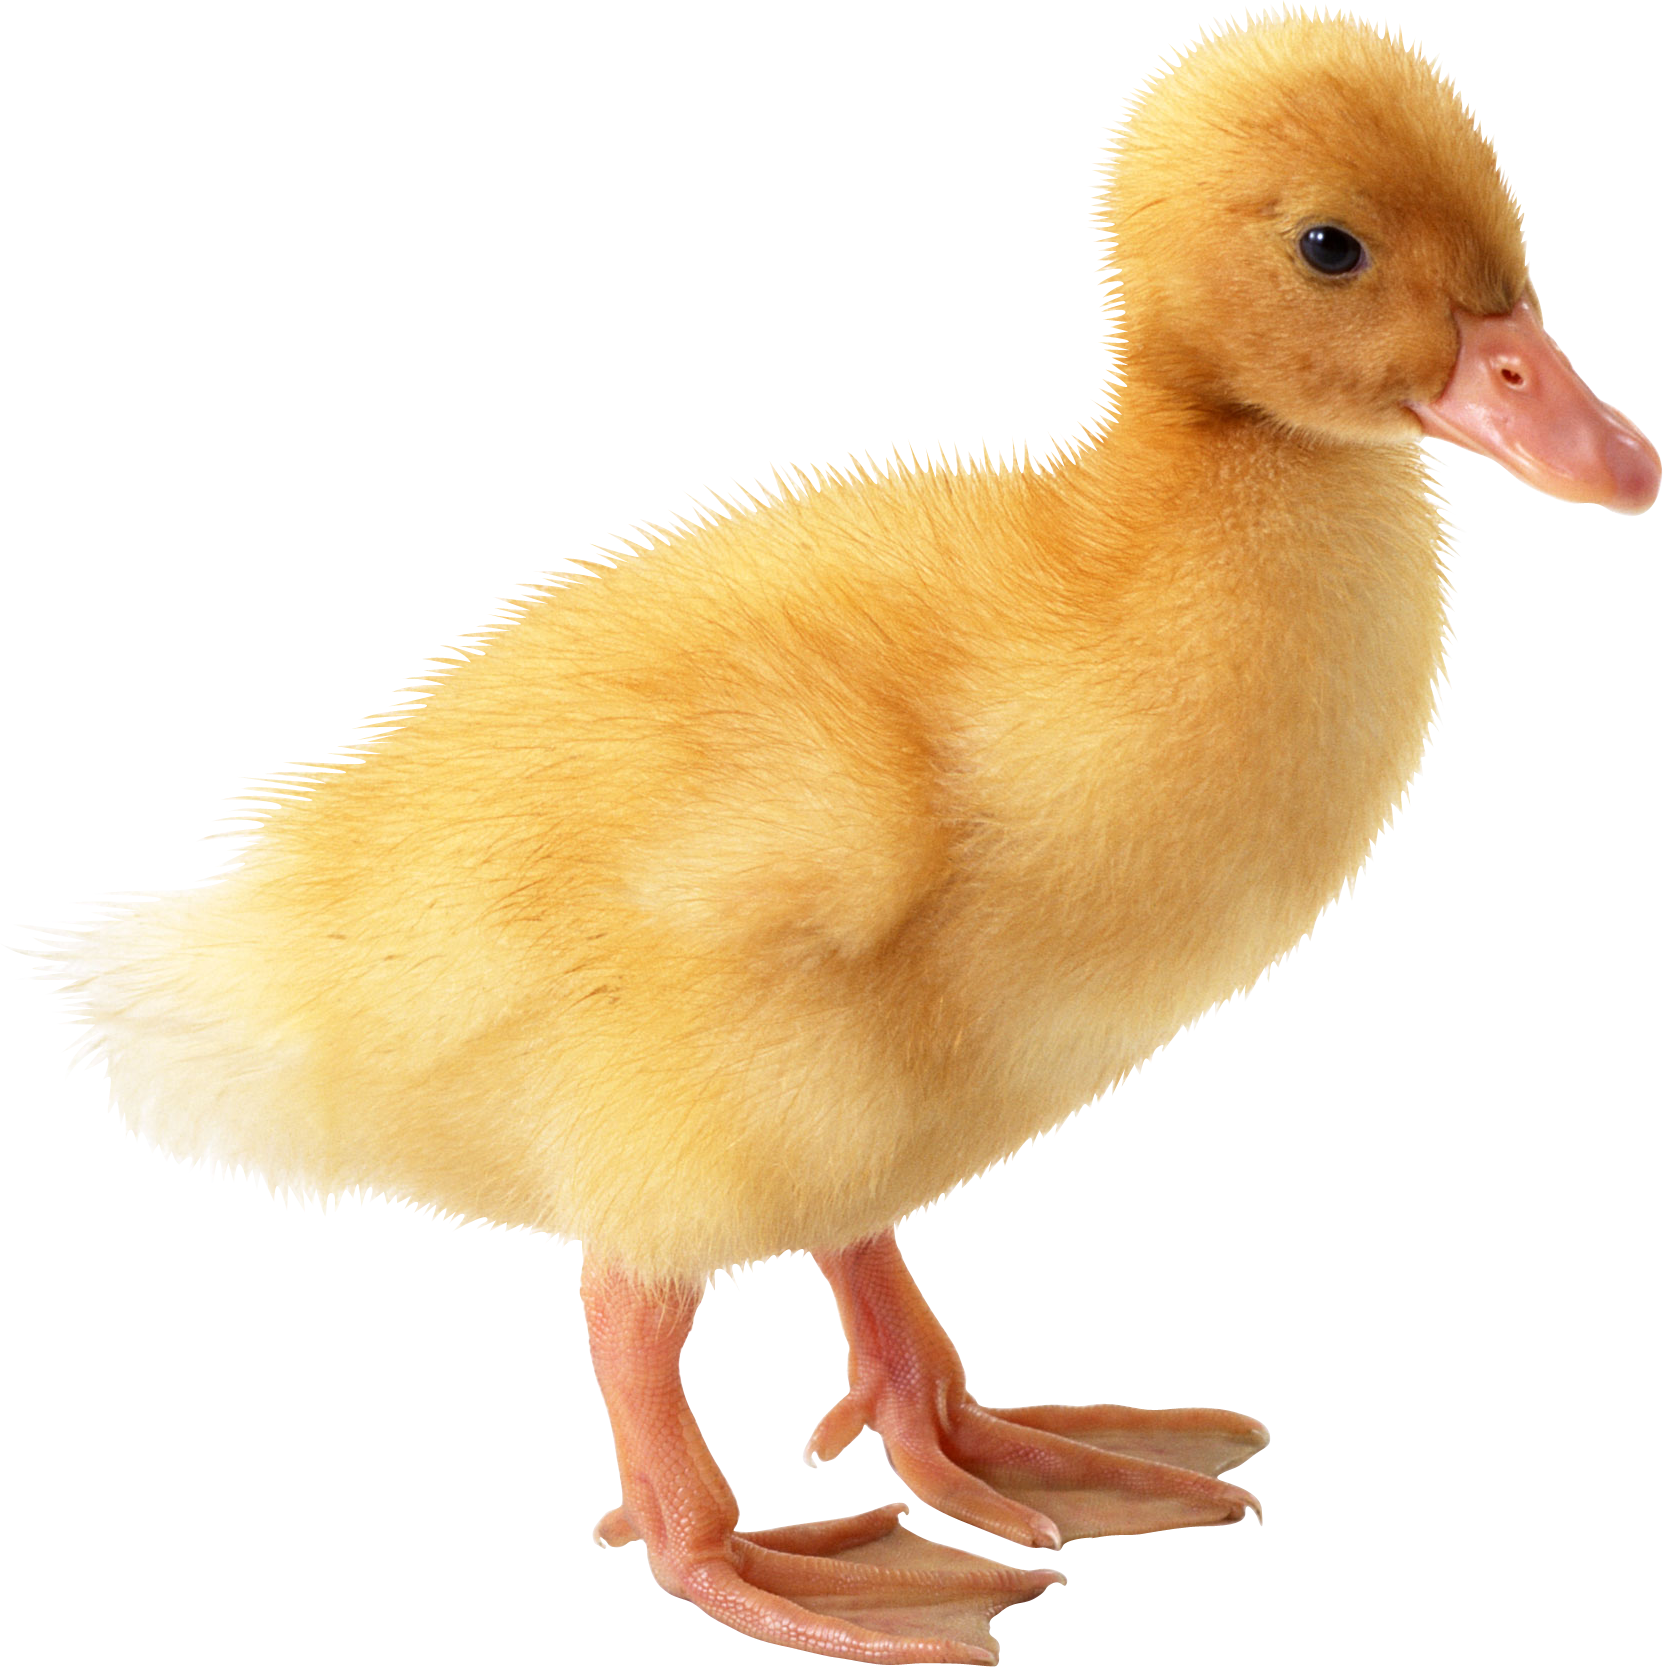 Little yellow duck PNG image